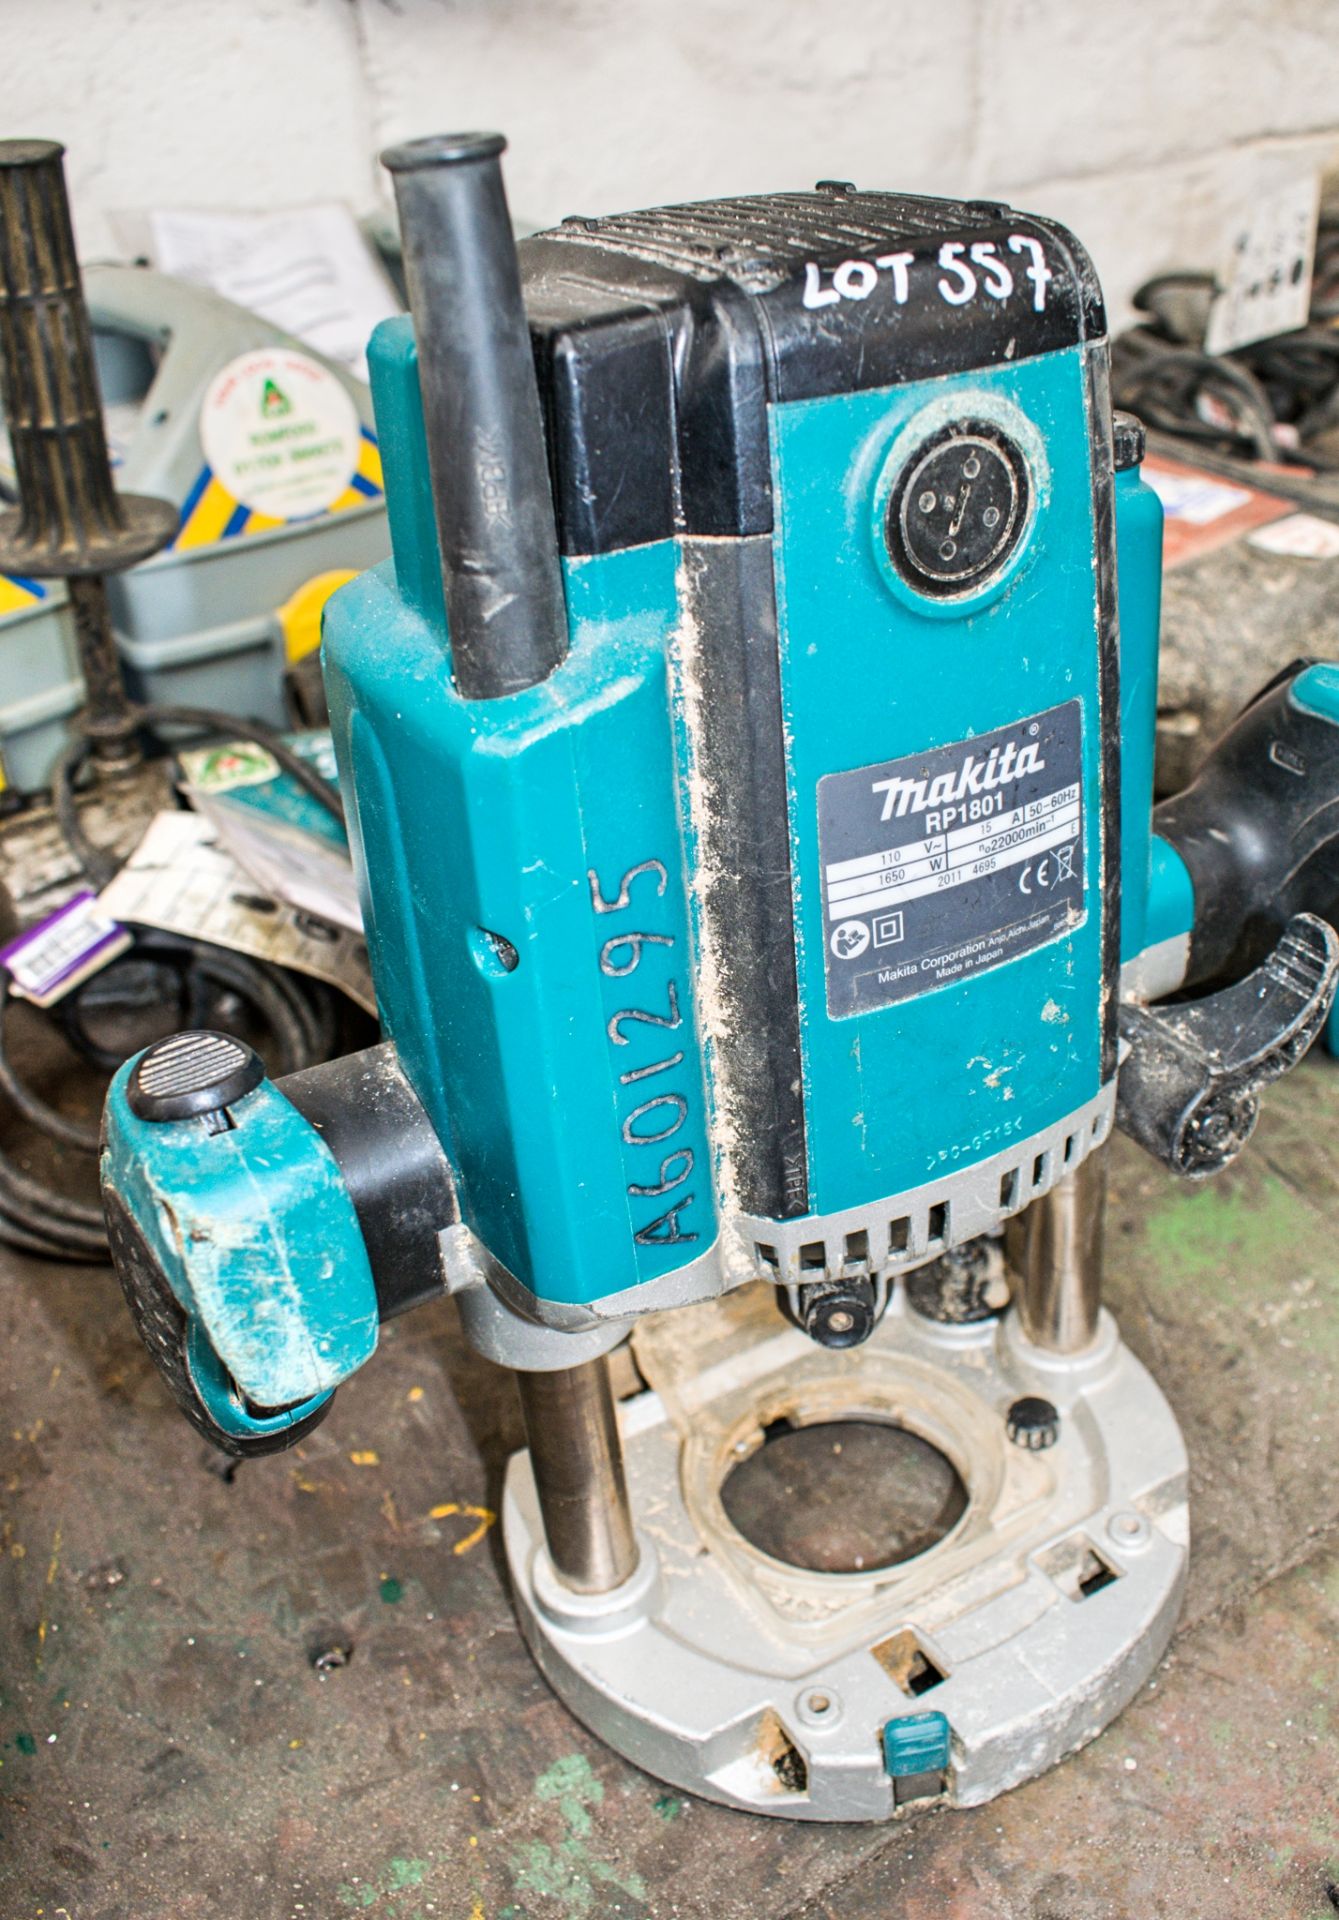 Makita 110v router A601295 ** Power cord missing **